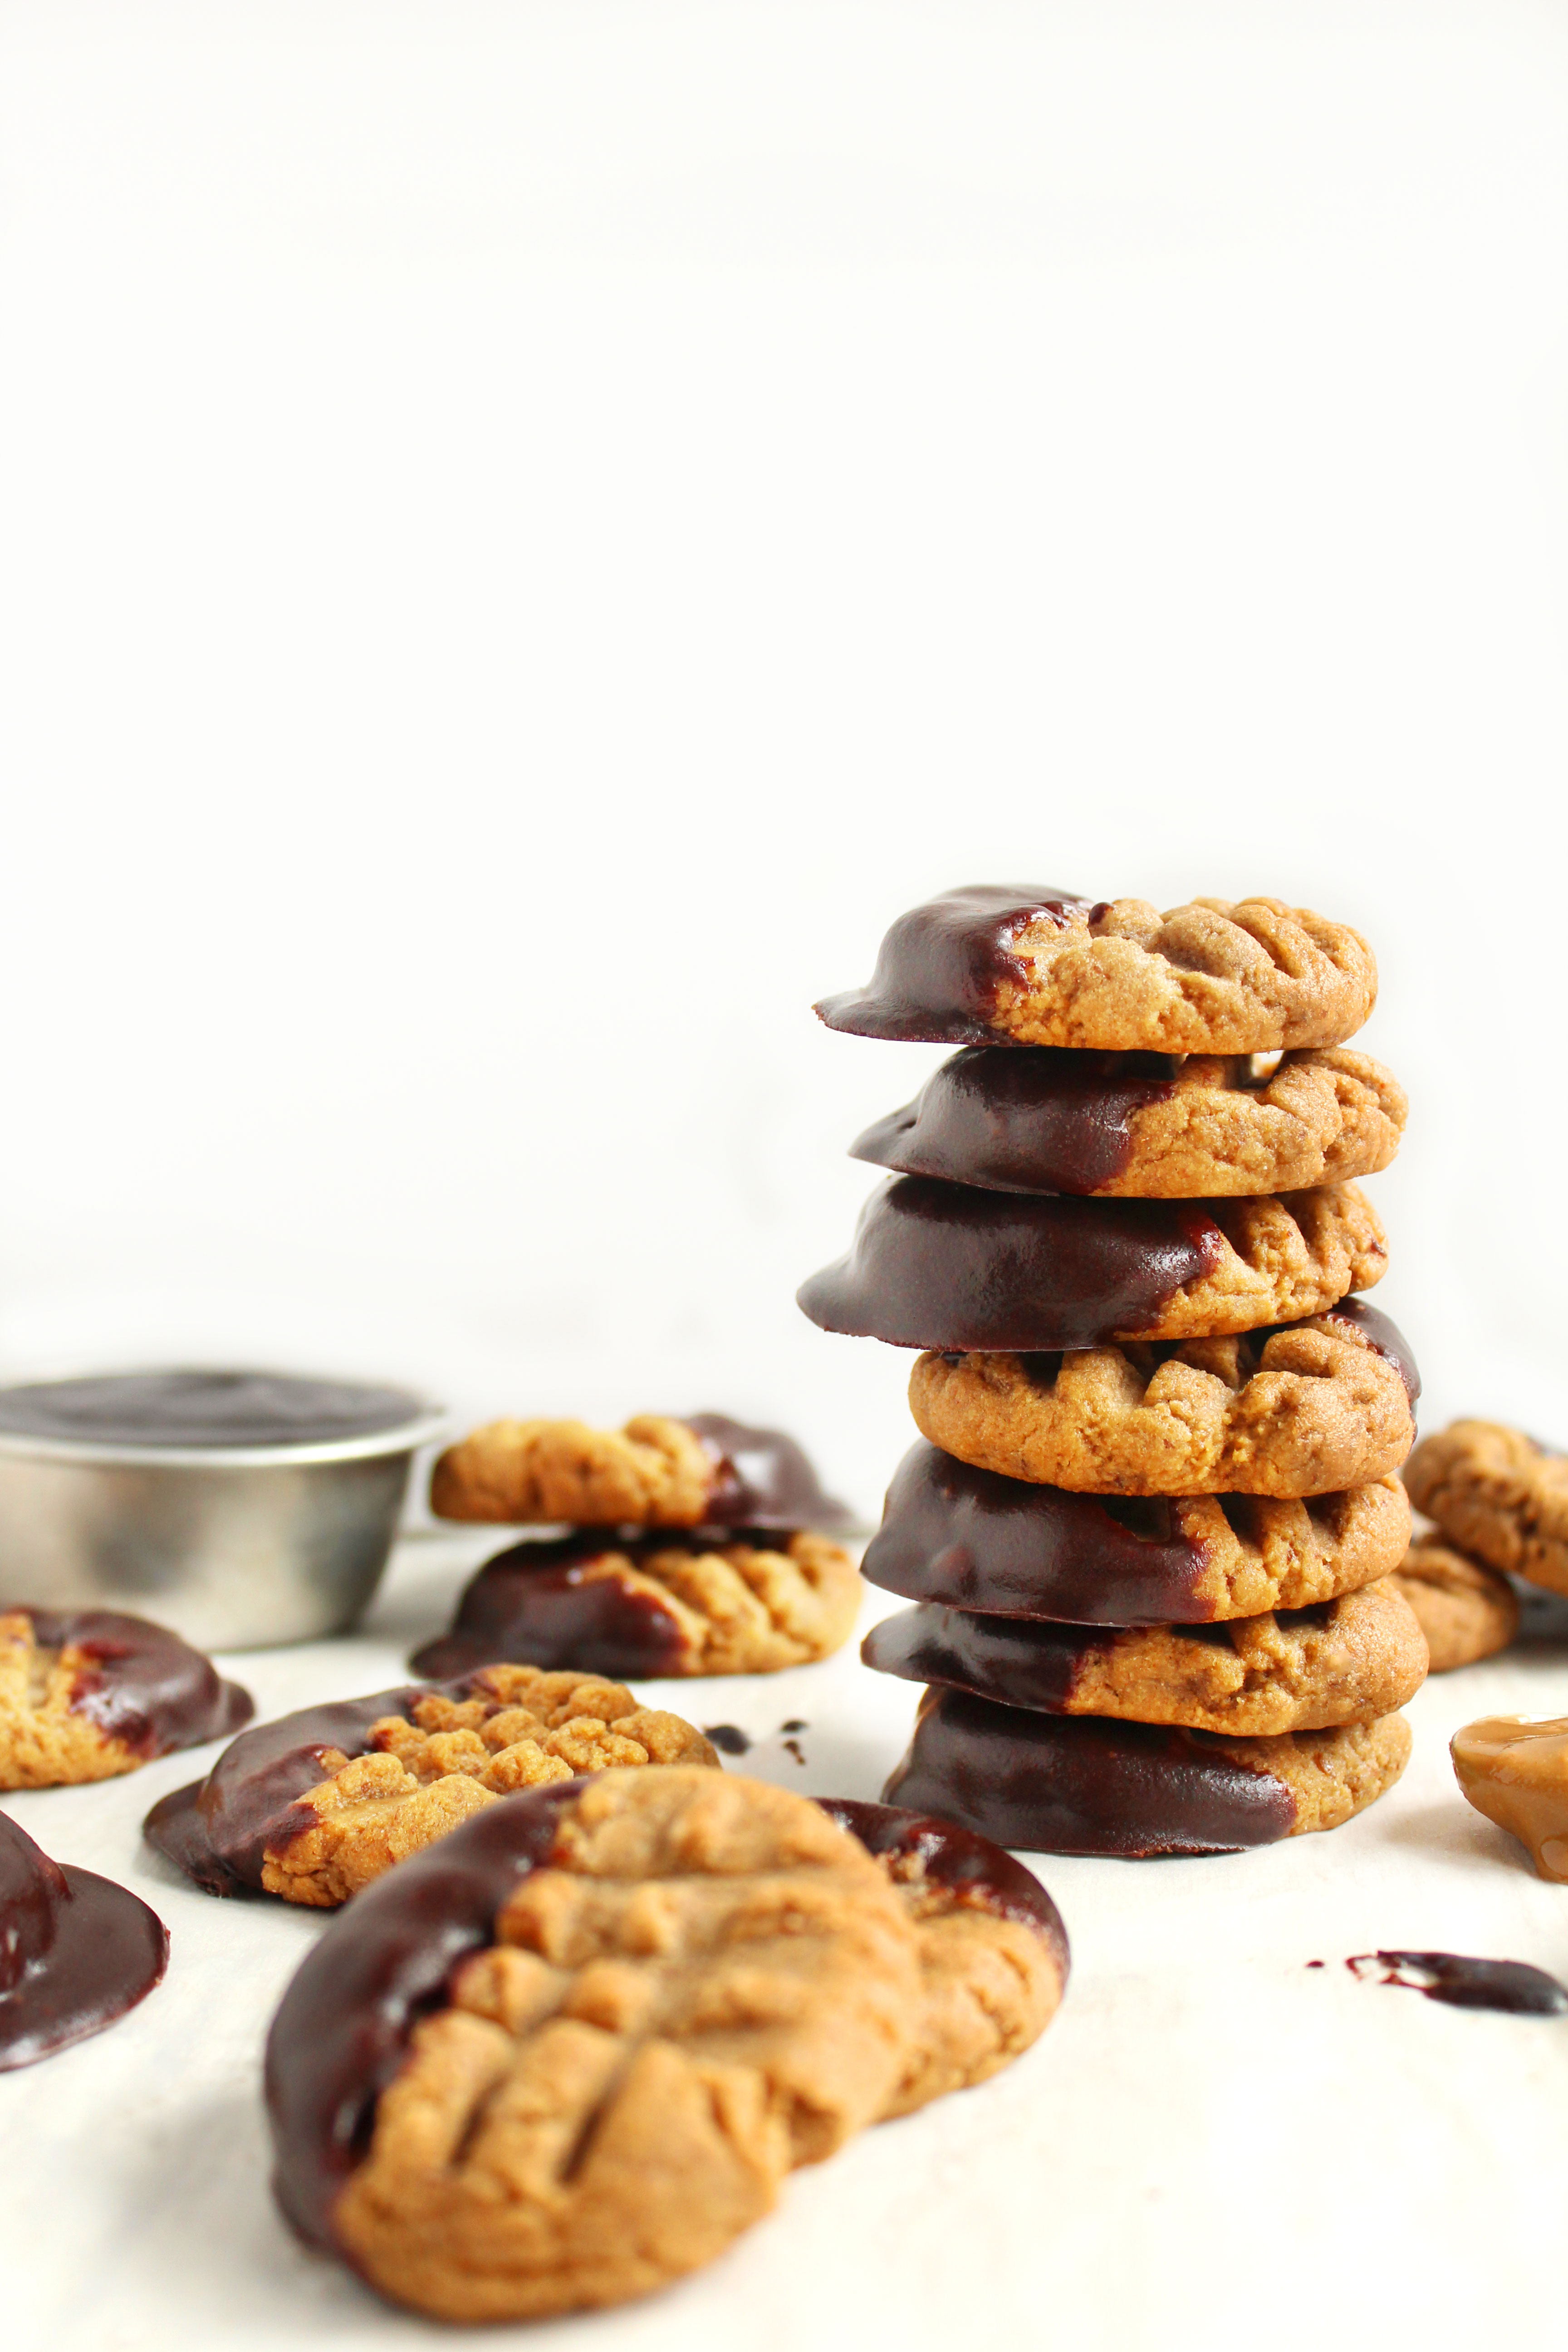 Chewy Chocolate Dipped Sunbutter Cookies (V + GF)! SUPER chewy, peanut-buttery, and delicious! Will cure any peanut butter/chocolate craving! #vegan #glutenfree #cookies | Peachandthecobbler.com